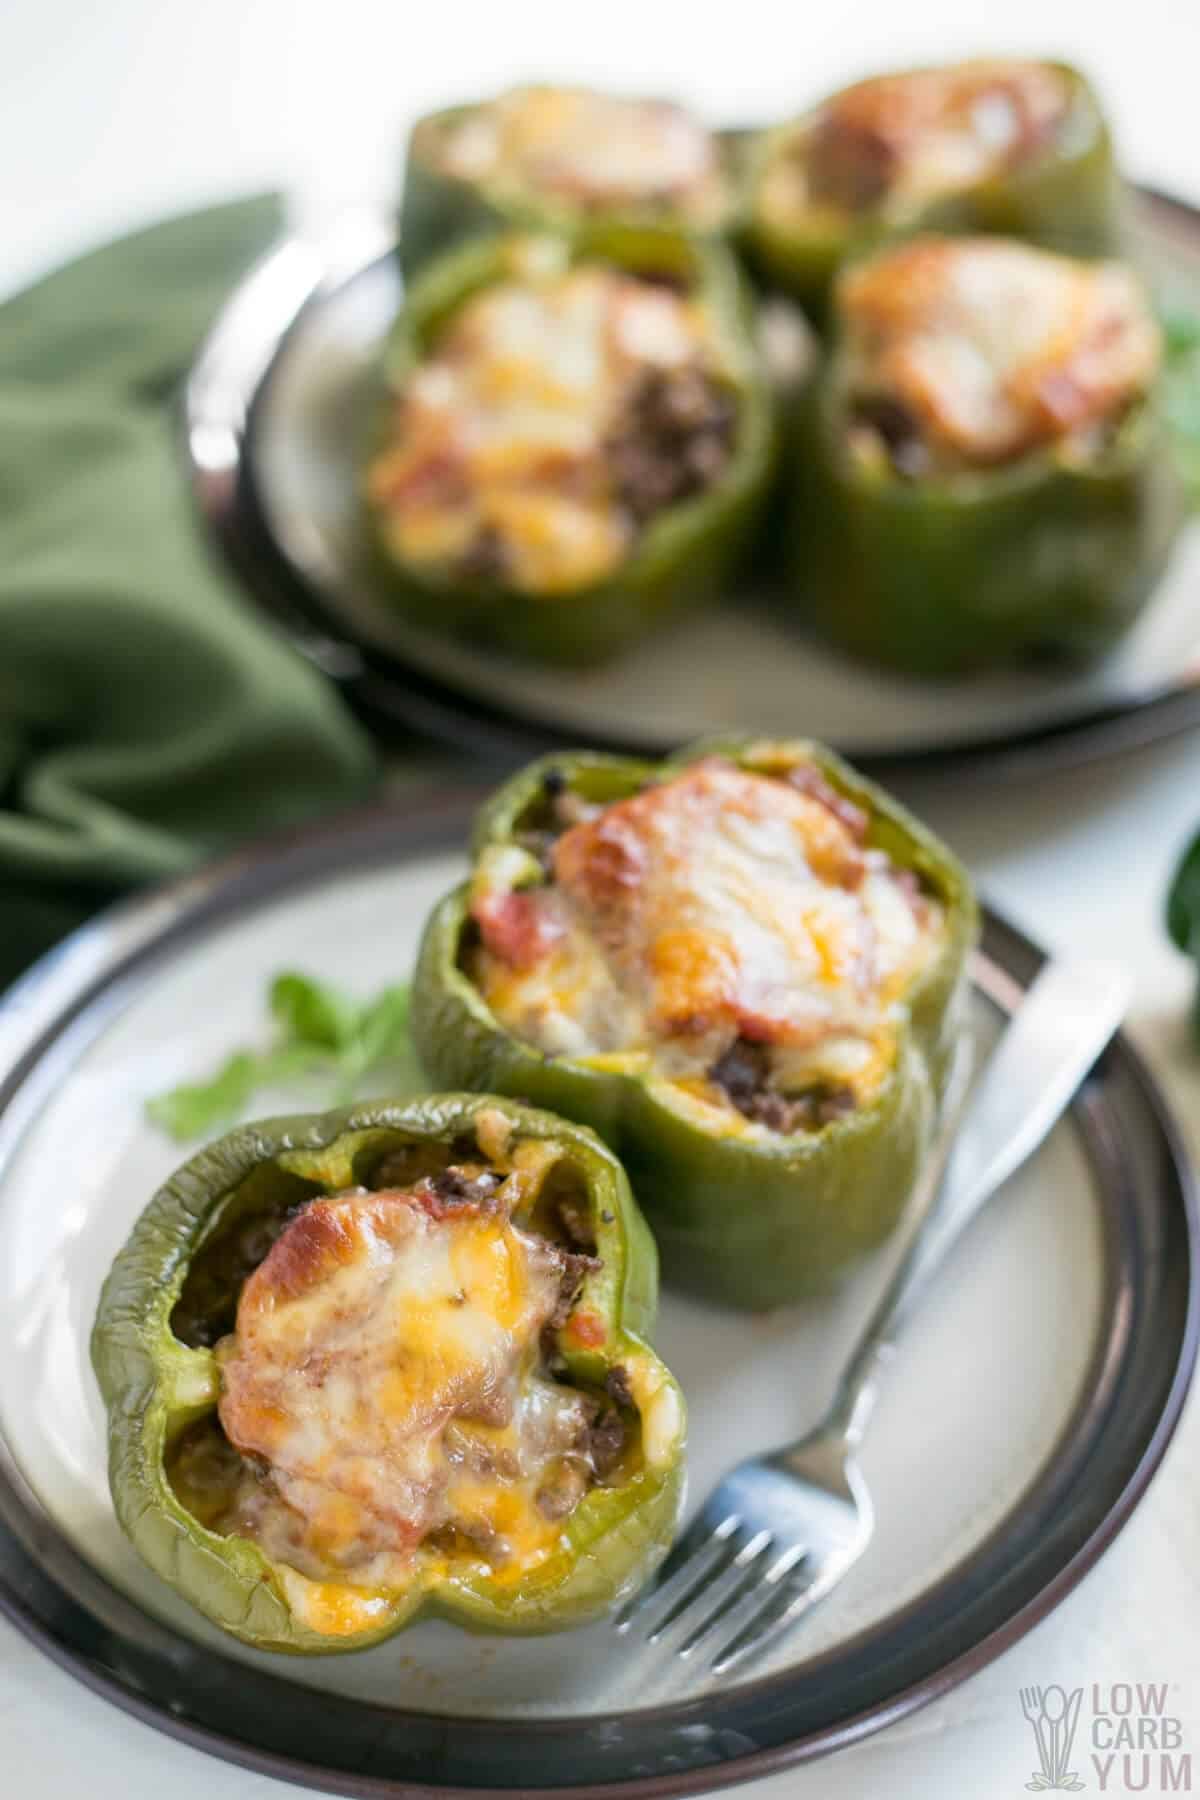 green bell peppers are stuffed with keto approved ground beef and cheeses